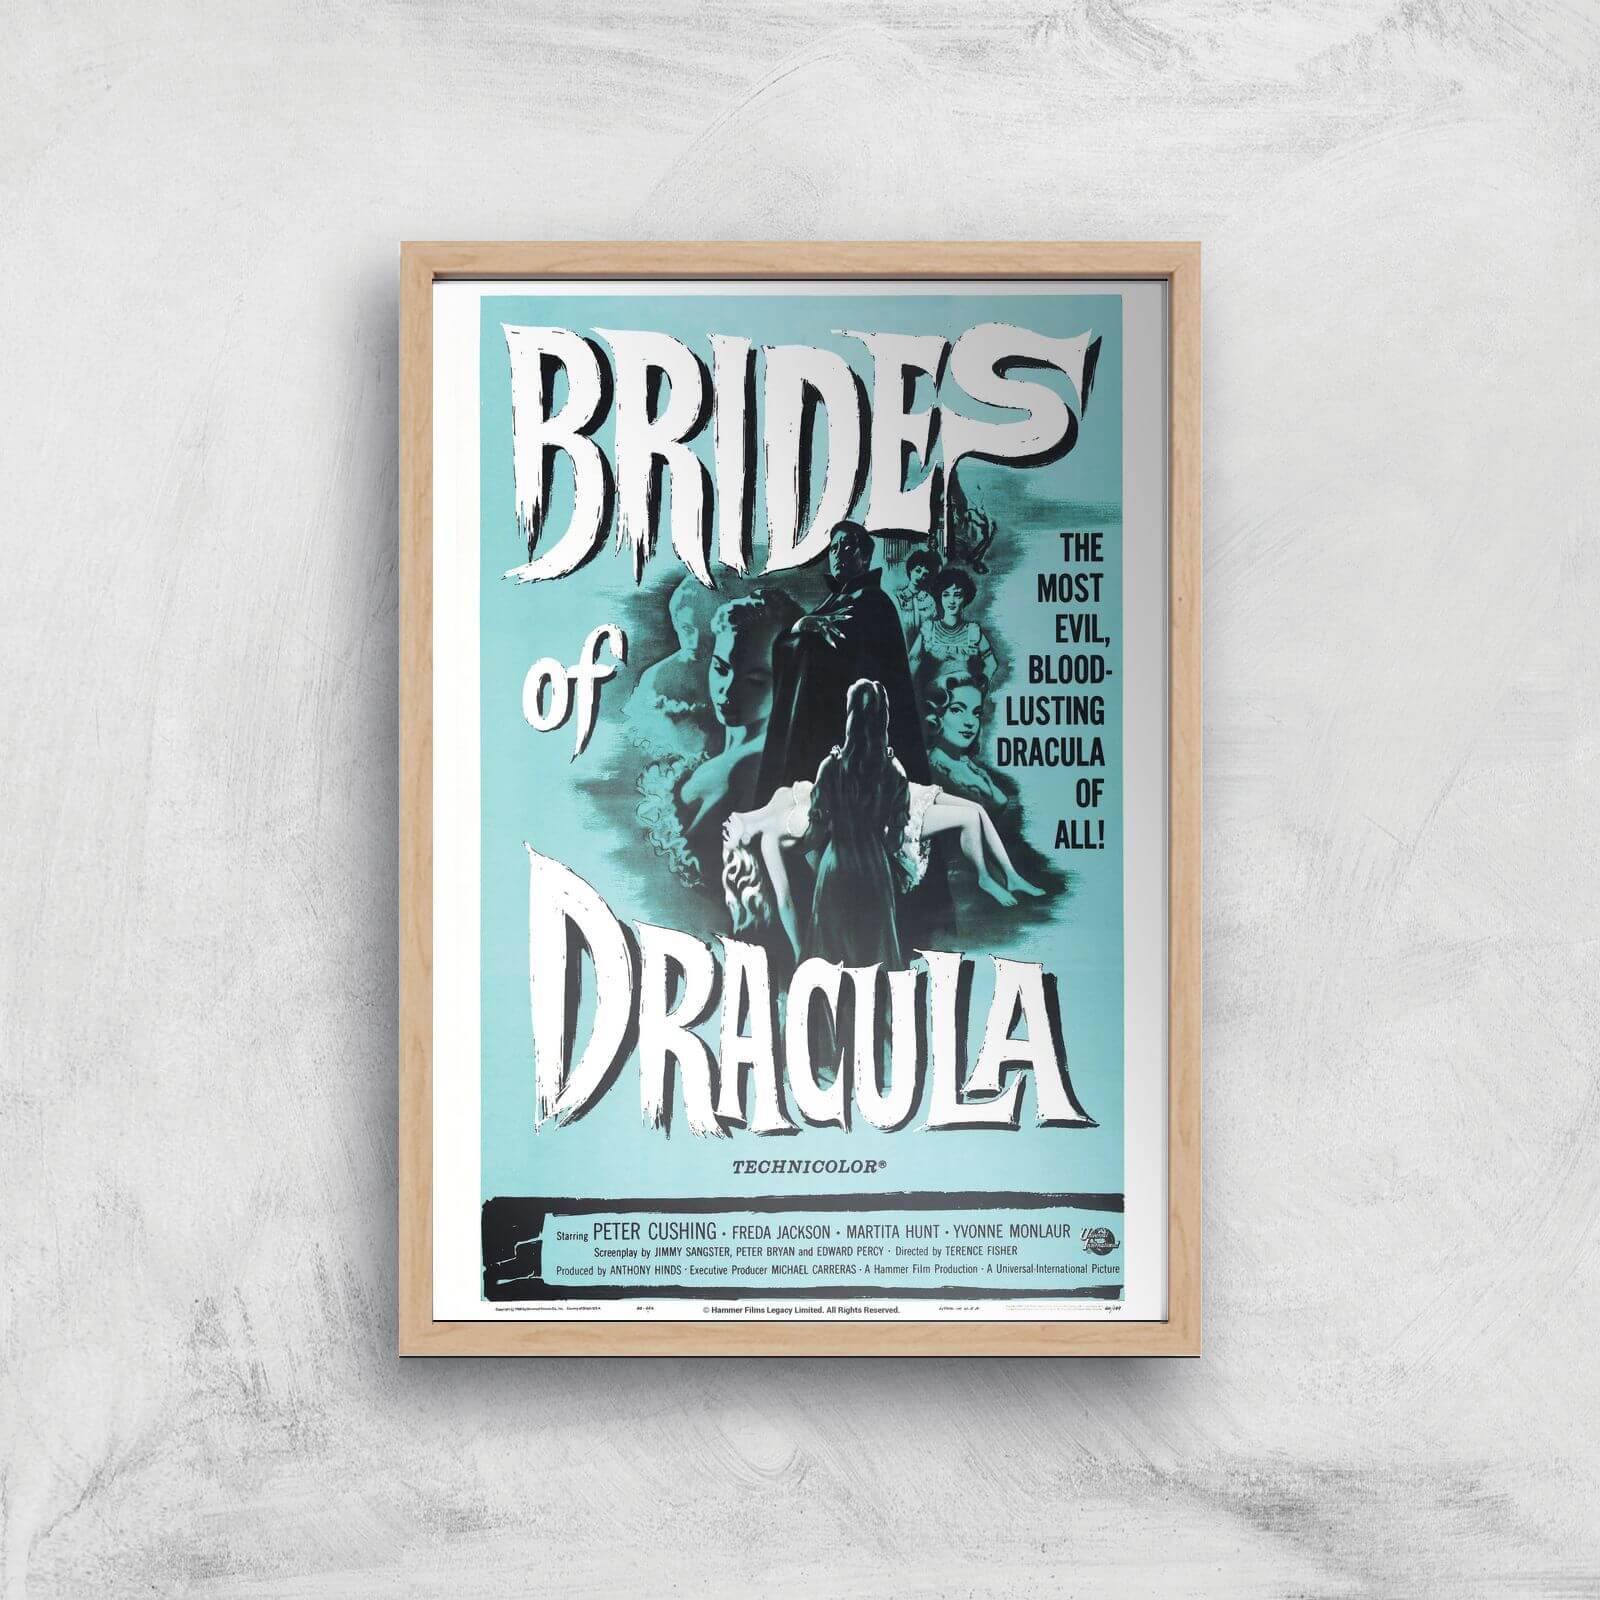 Brides Of Dracula Giclee Art Print - A4 - Wooden Frame